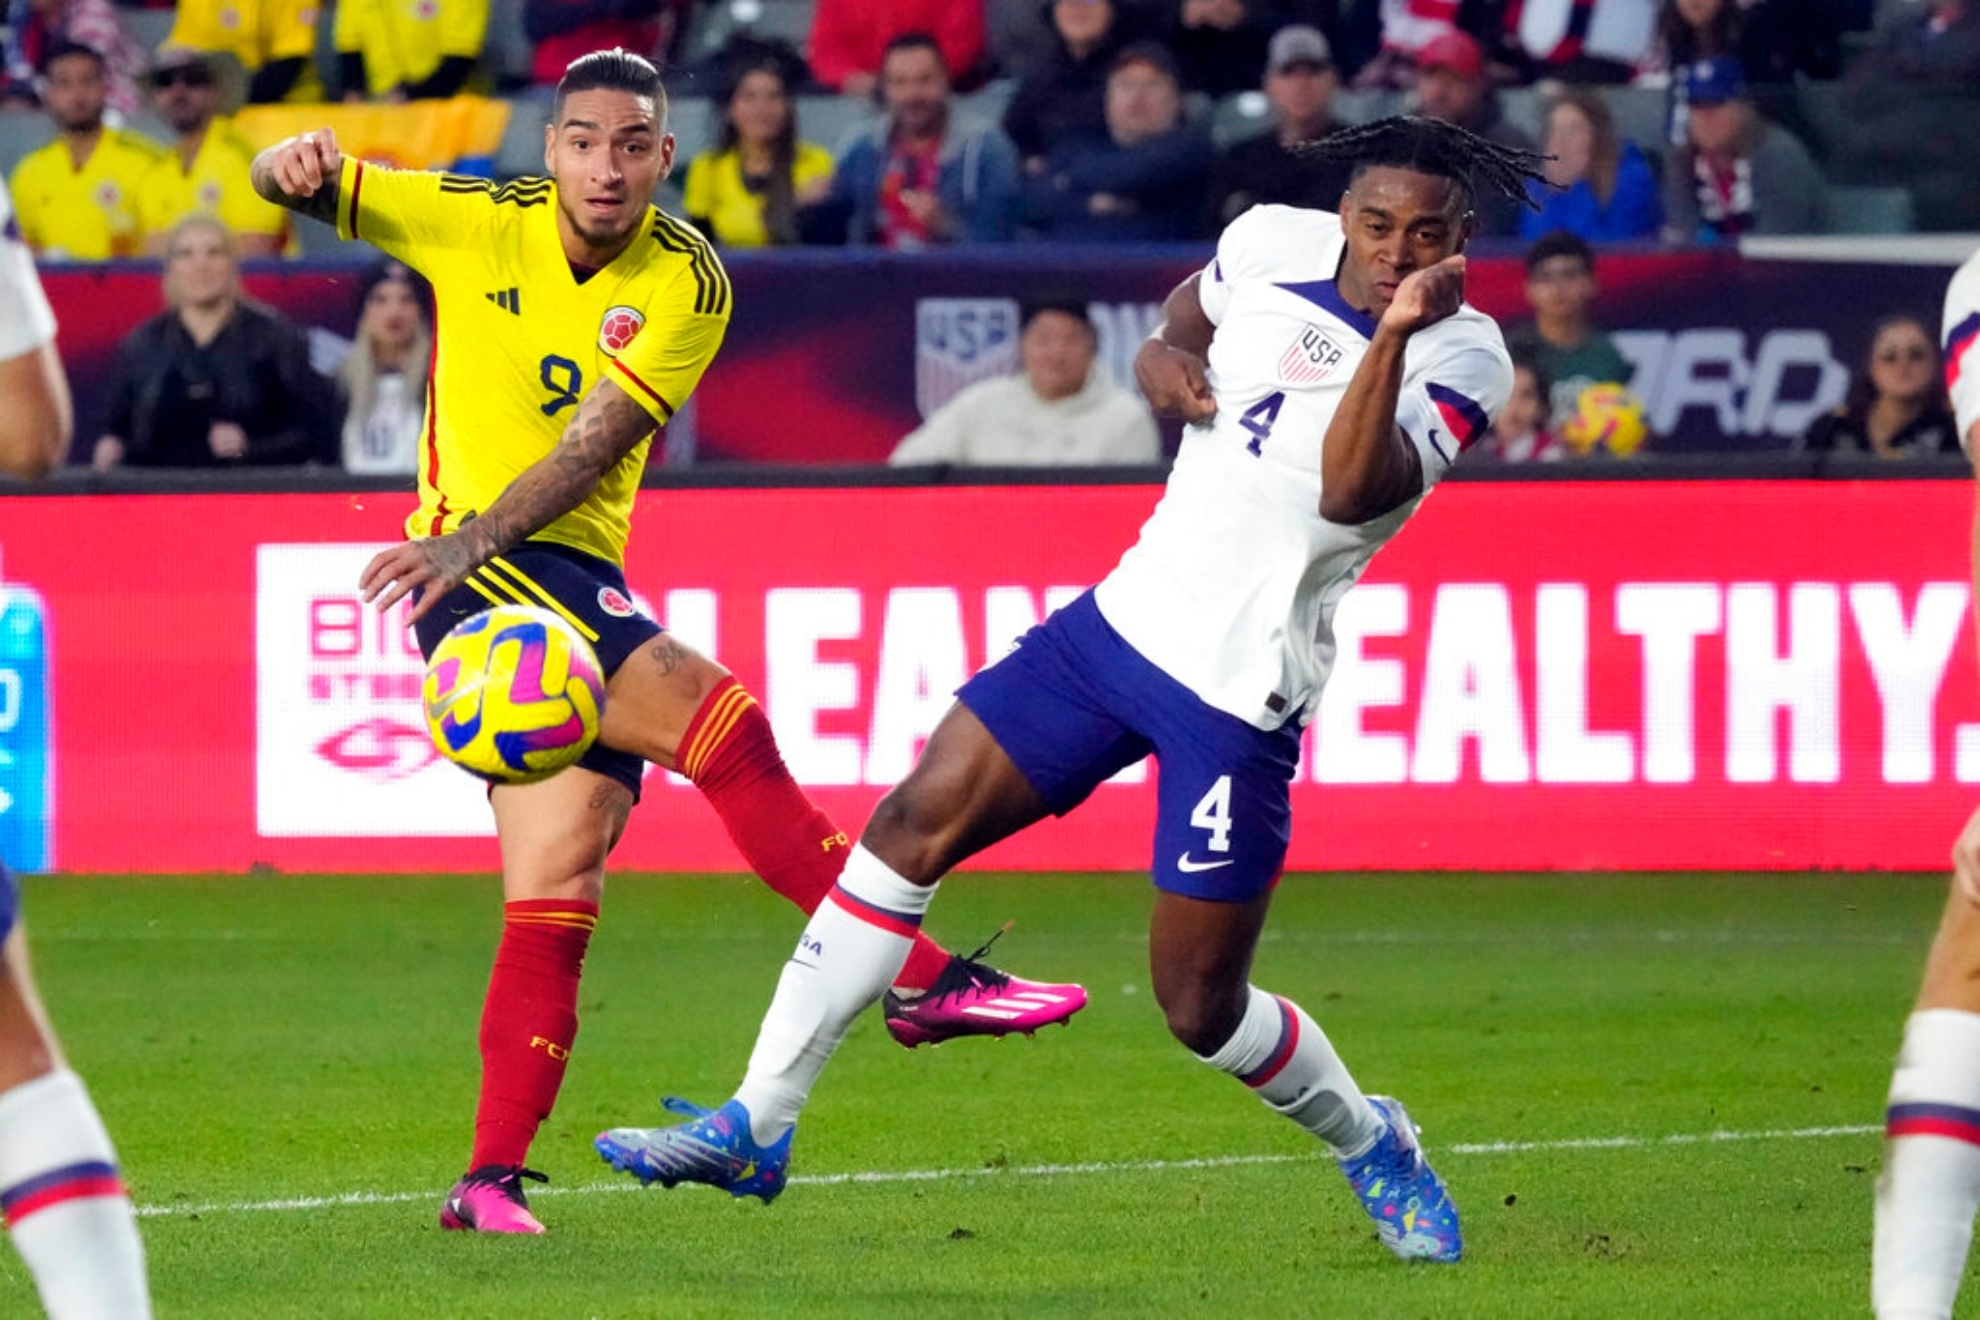 USMNT remains winless in their second consecutive game, this time against Colombia's B team